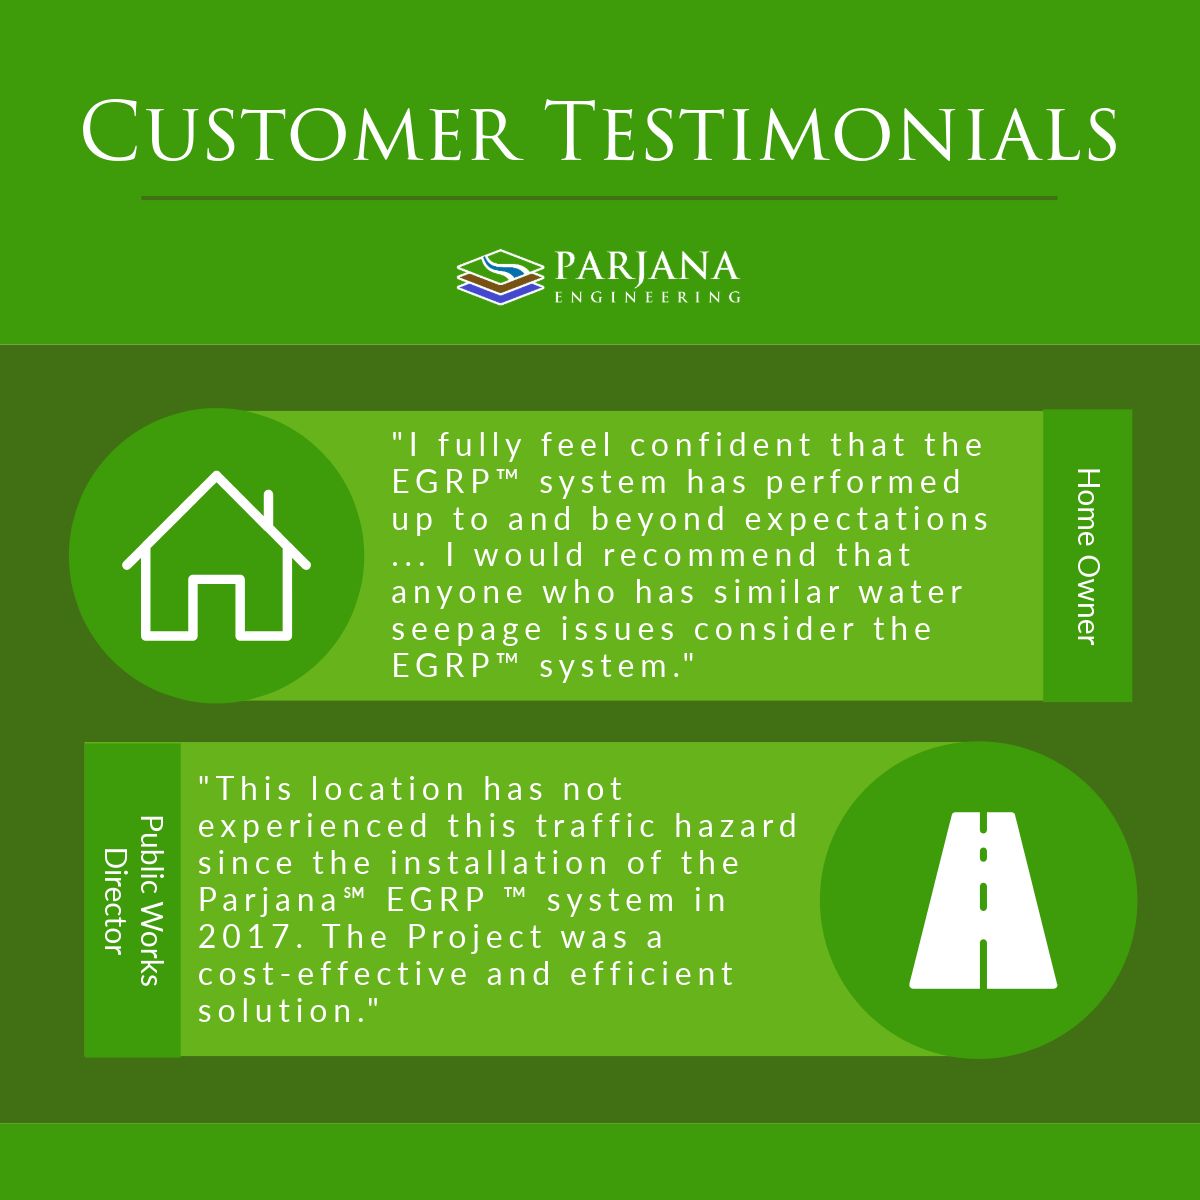 Sharing the joy of our happy customers! These testimonials are proof of Parjana Engineering's commitment to excellence.
-
#parjanaengineering #sustainability #groundwaterrecharge #stormwatermanagement #floodprevention #EGRP #runoff